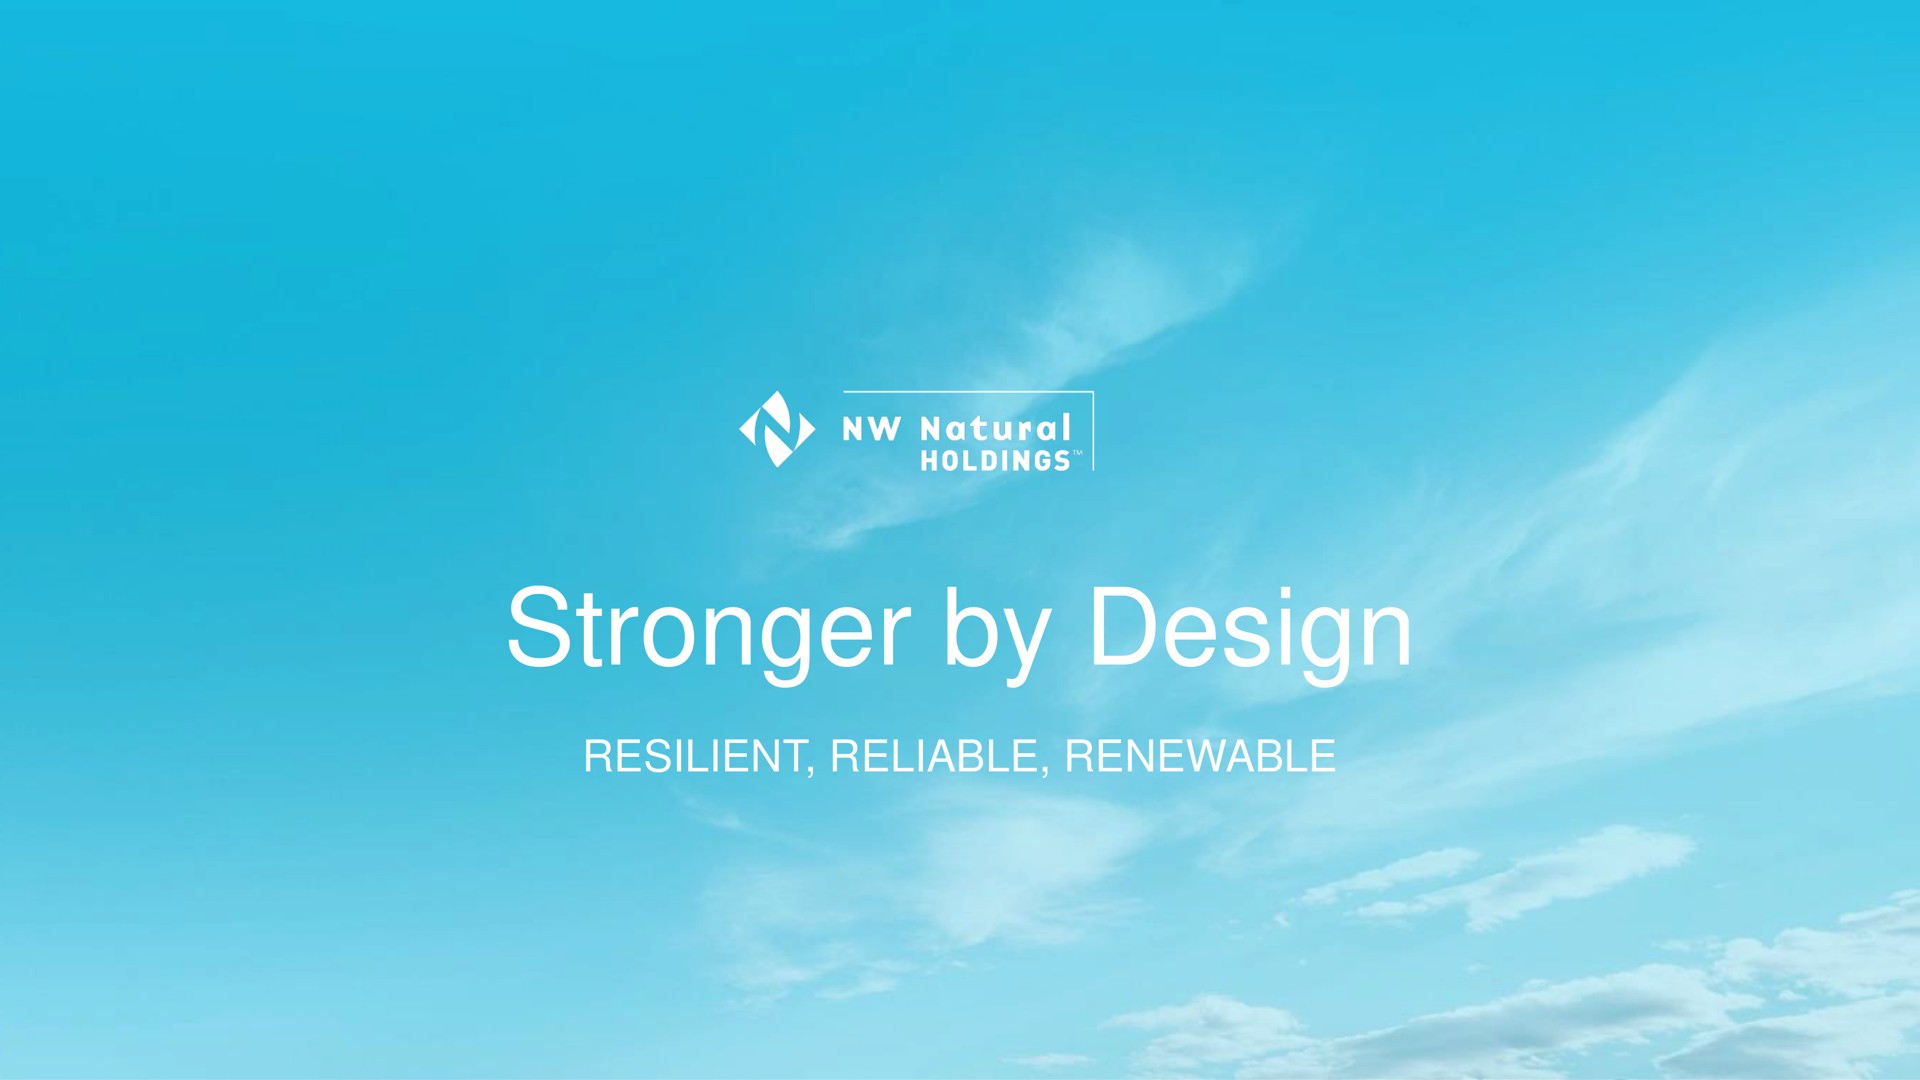 by design | NW Natural Holdings